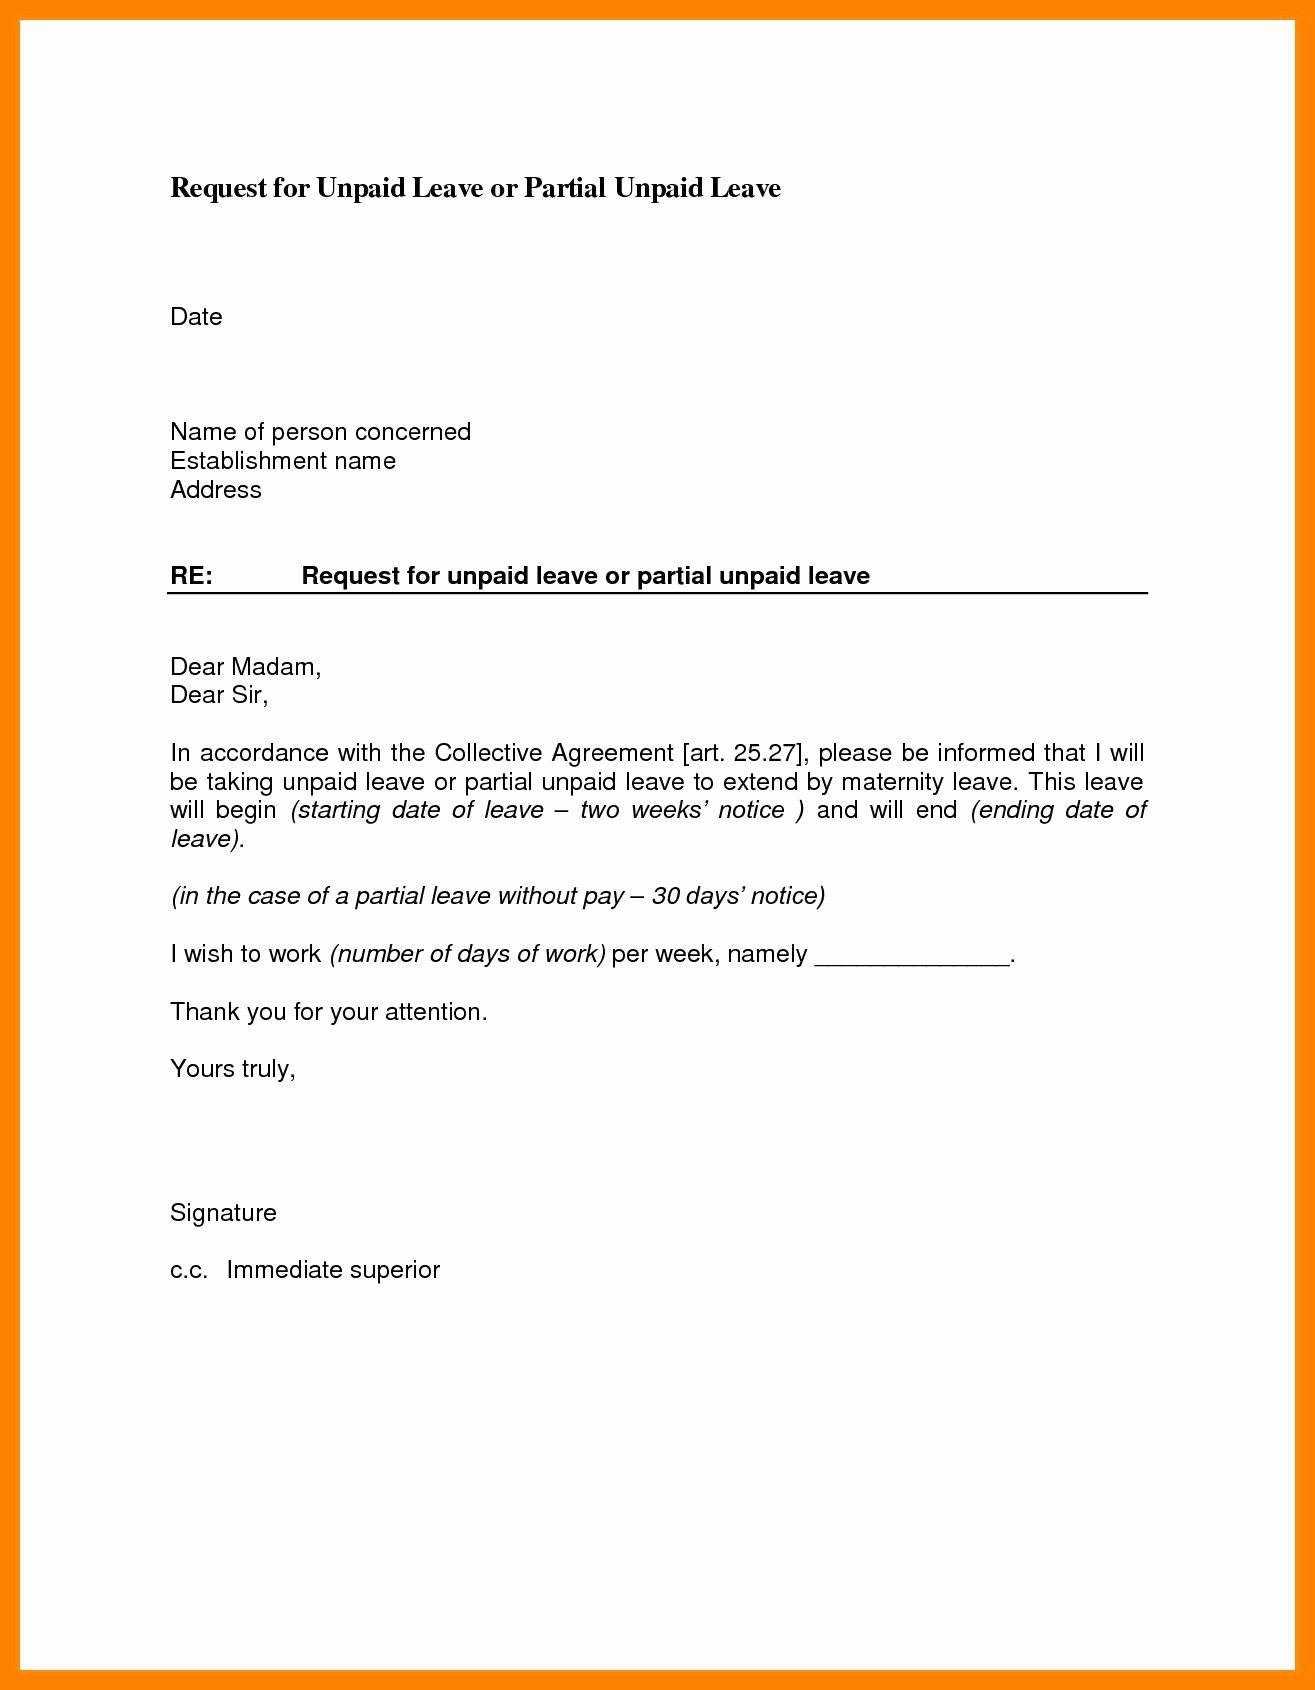 Application and Certificate for Payment Template Unique Sample Leave Pictjres Save Leave Request Letter Sample